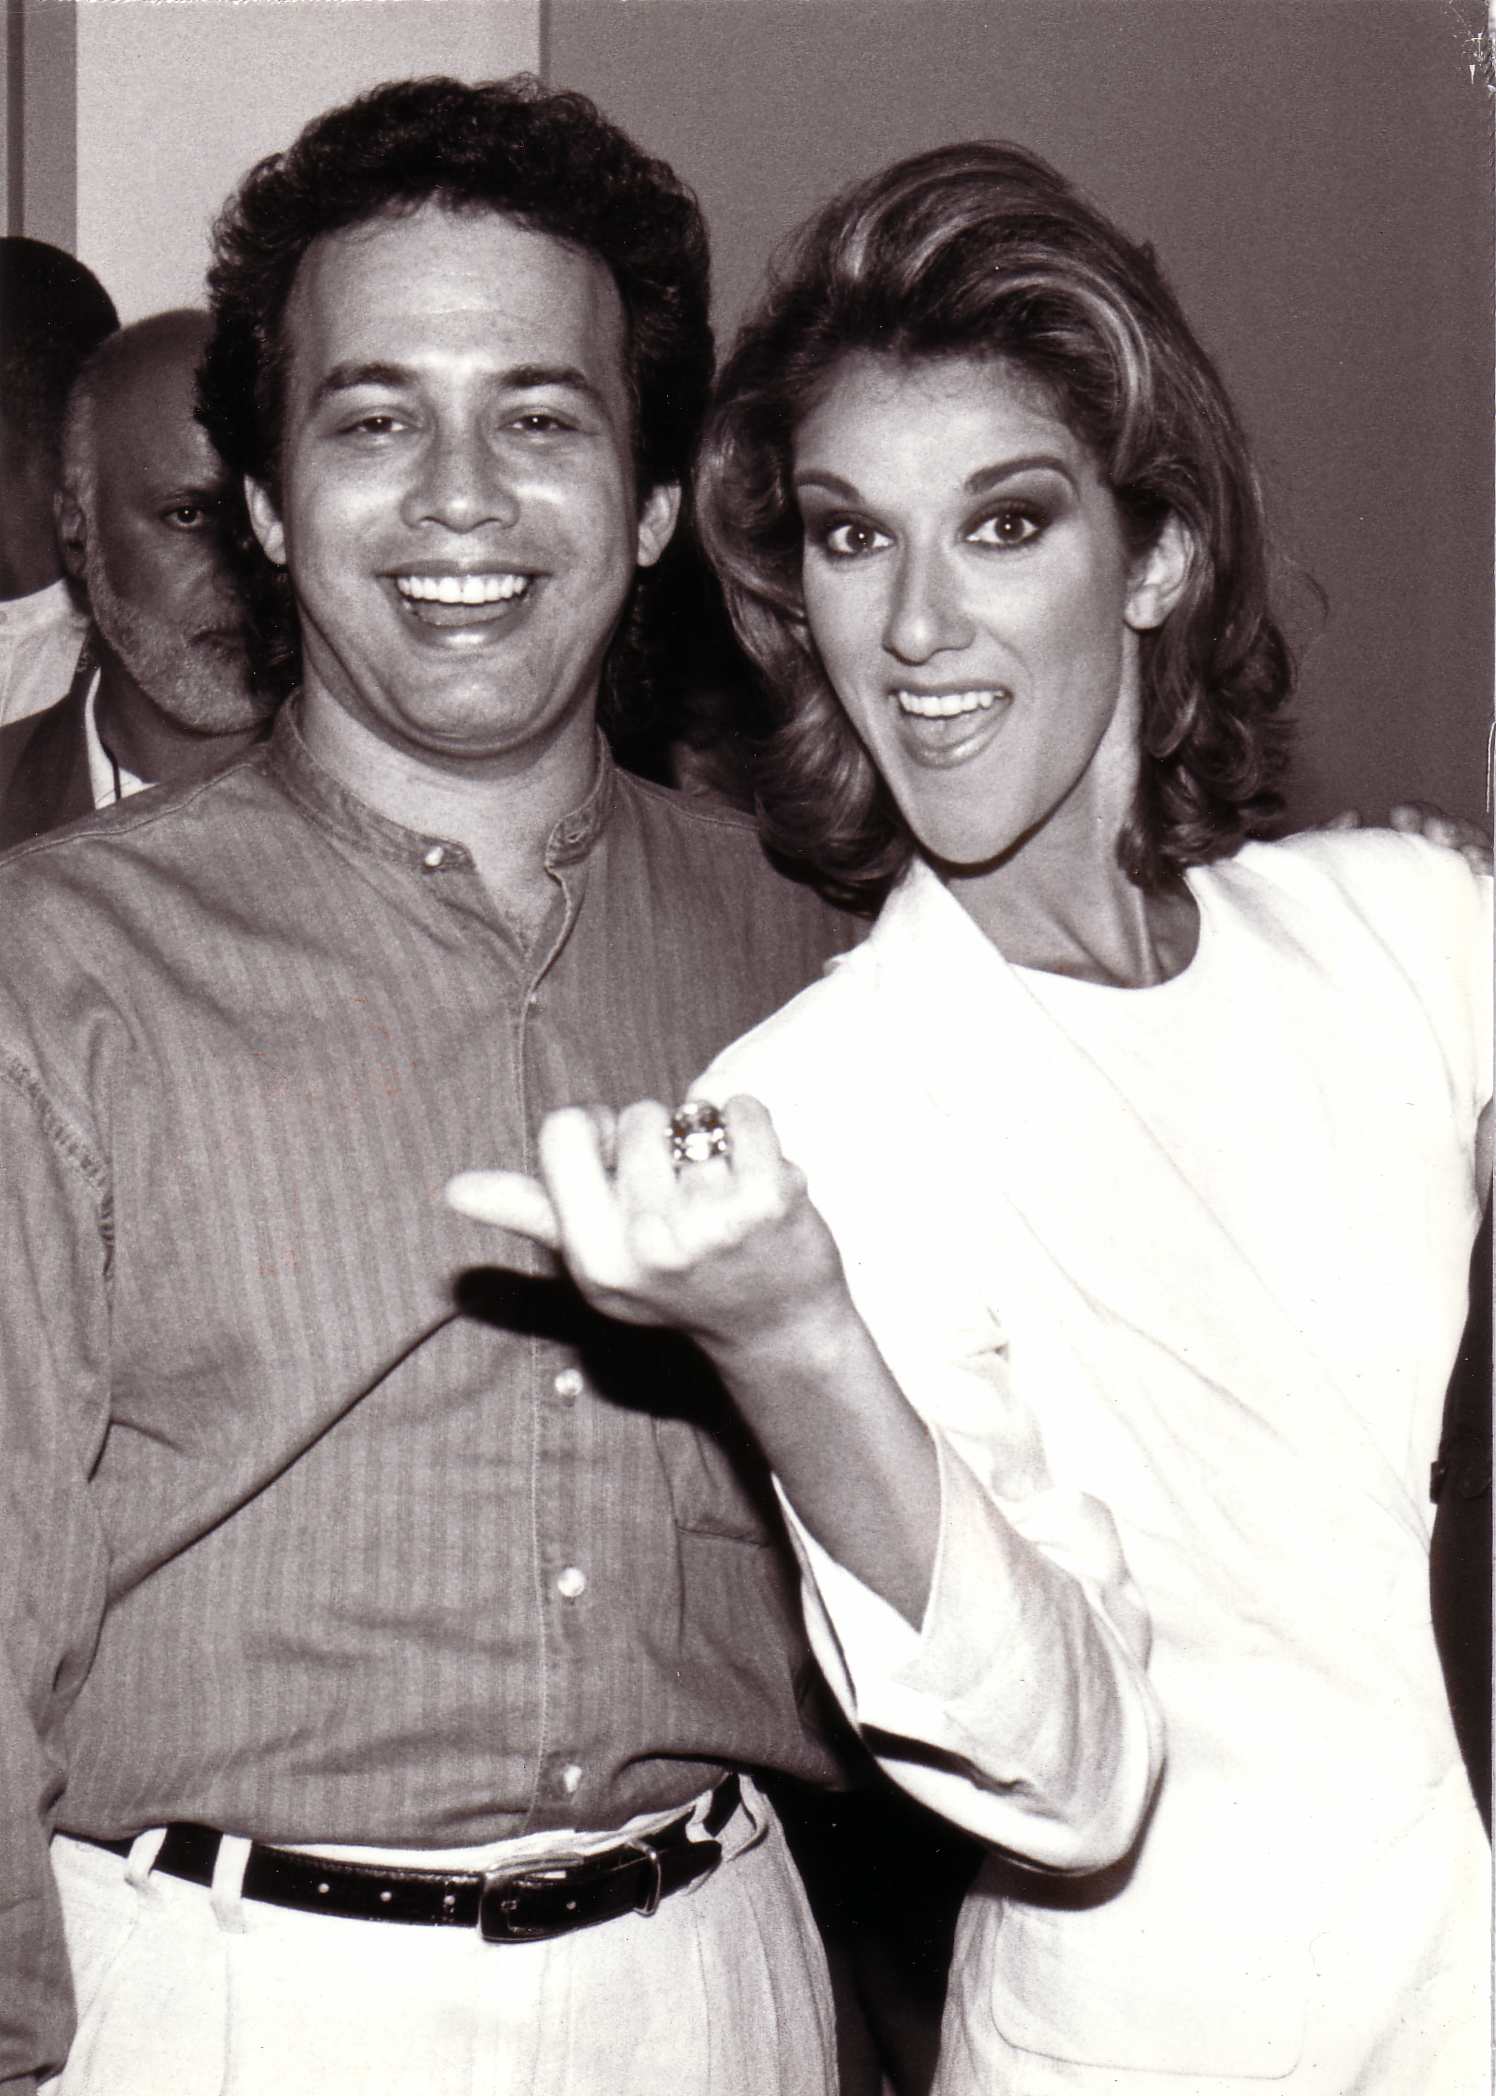 Michael Jay with Celine Dion